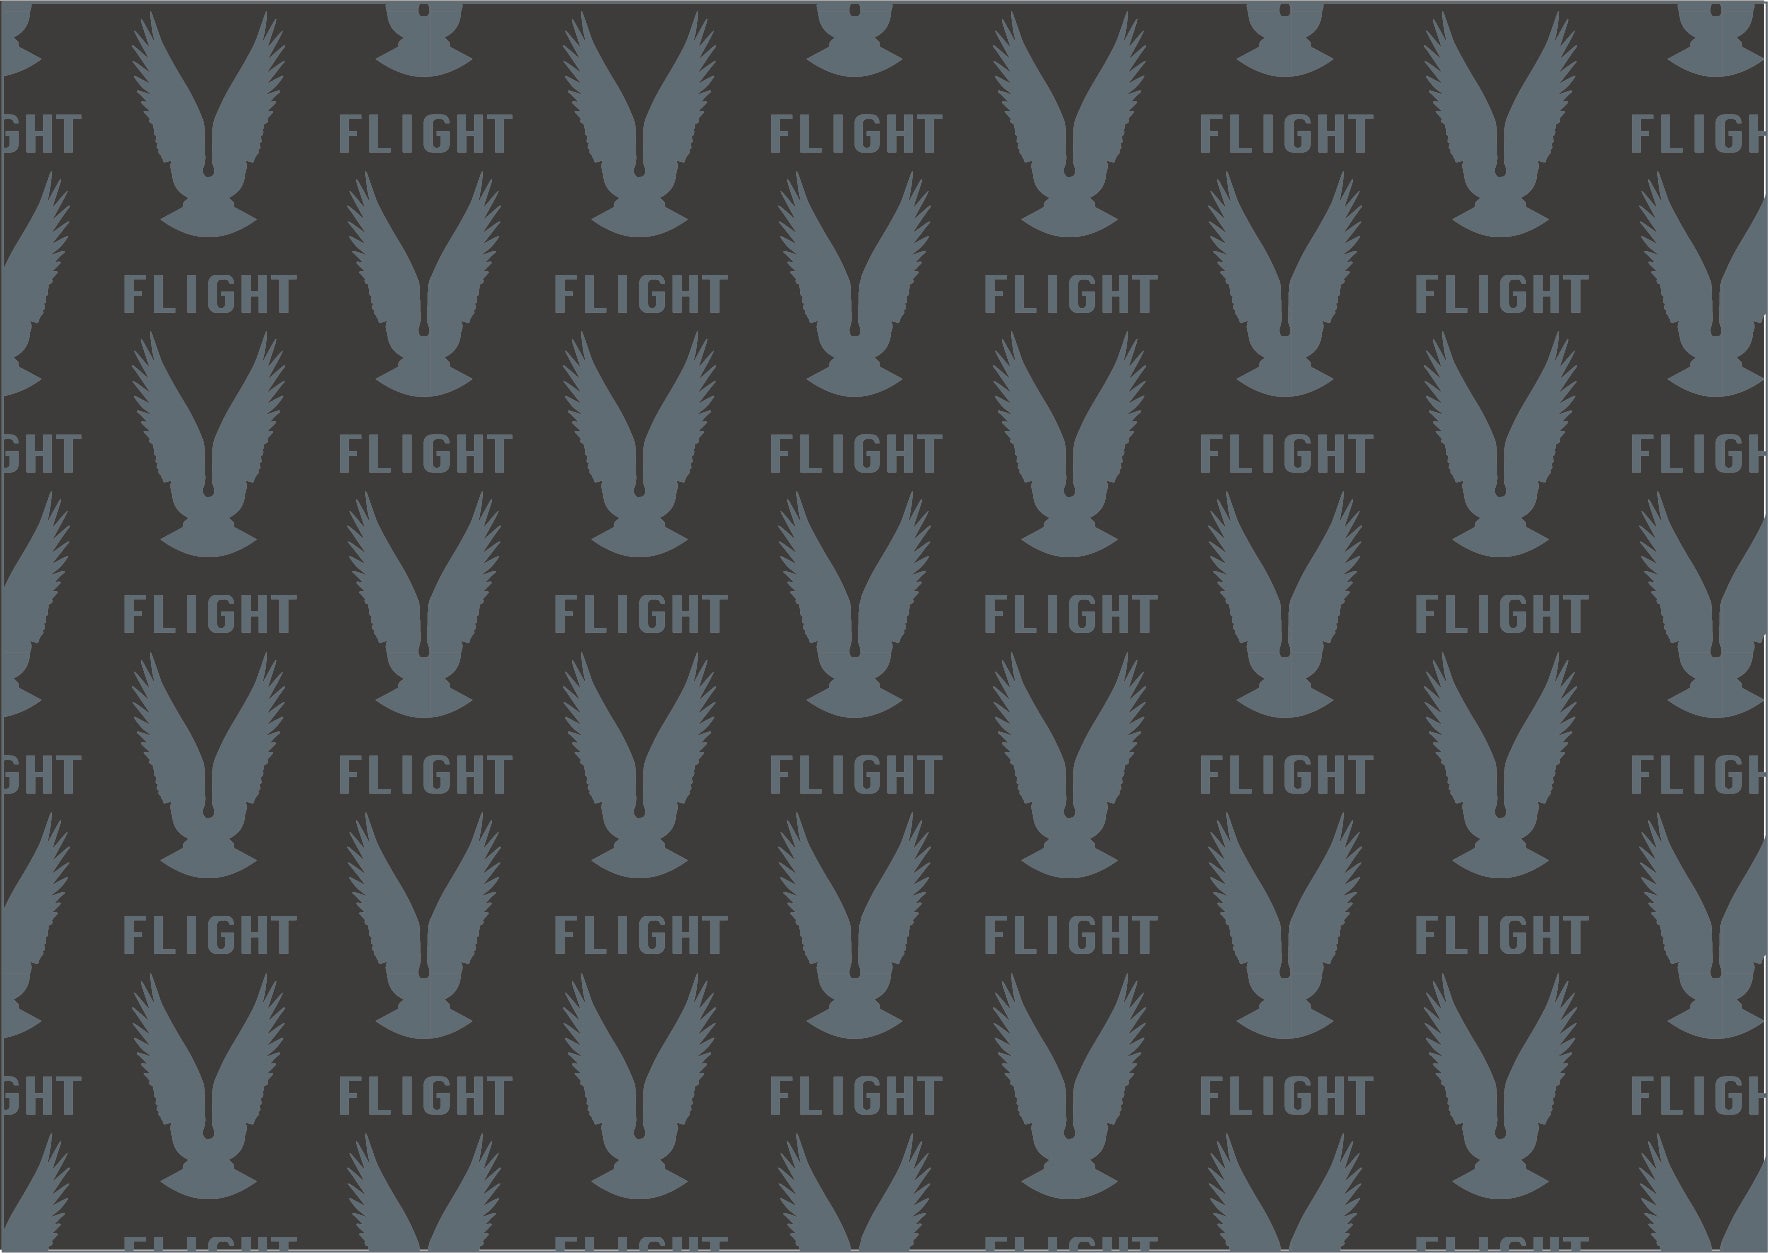 About The Flight Brand